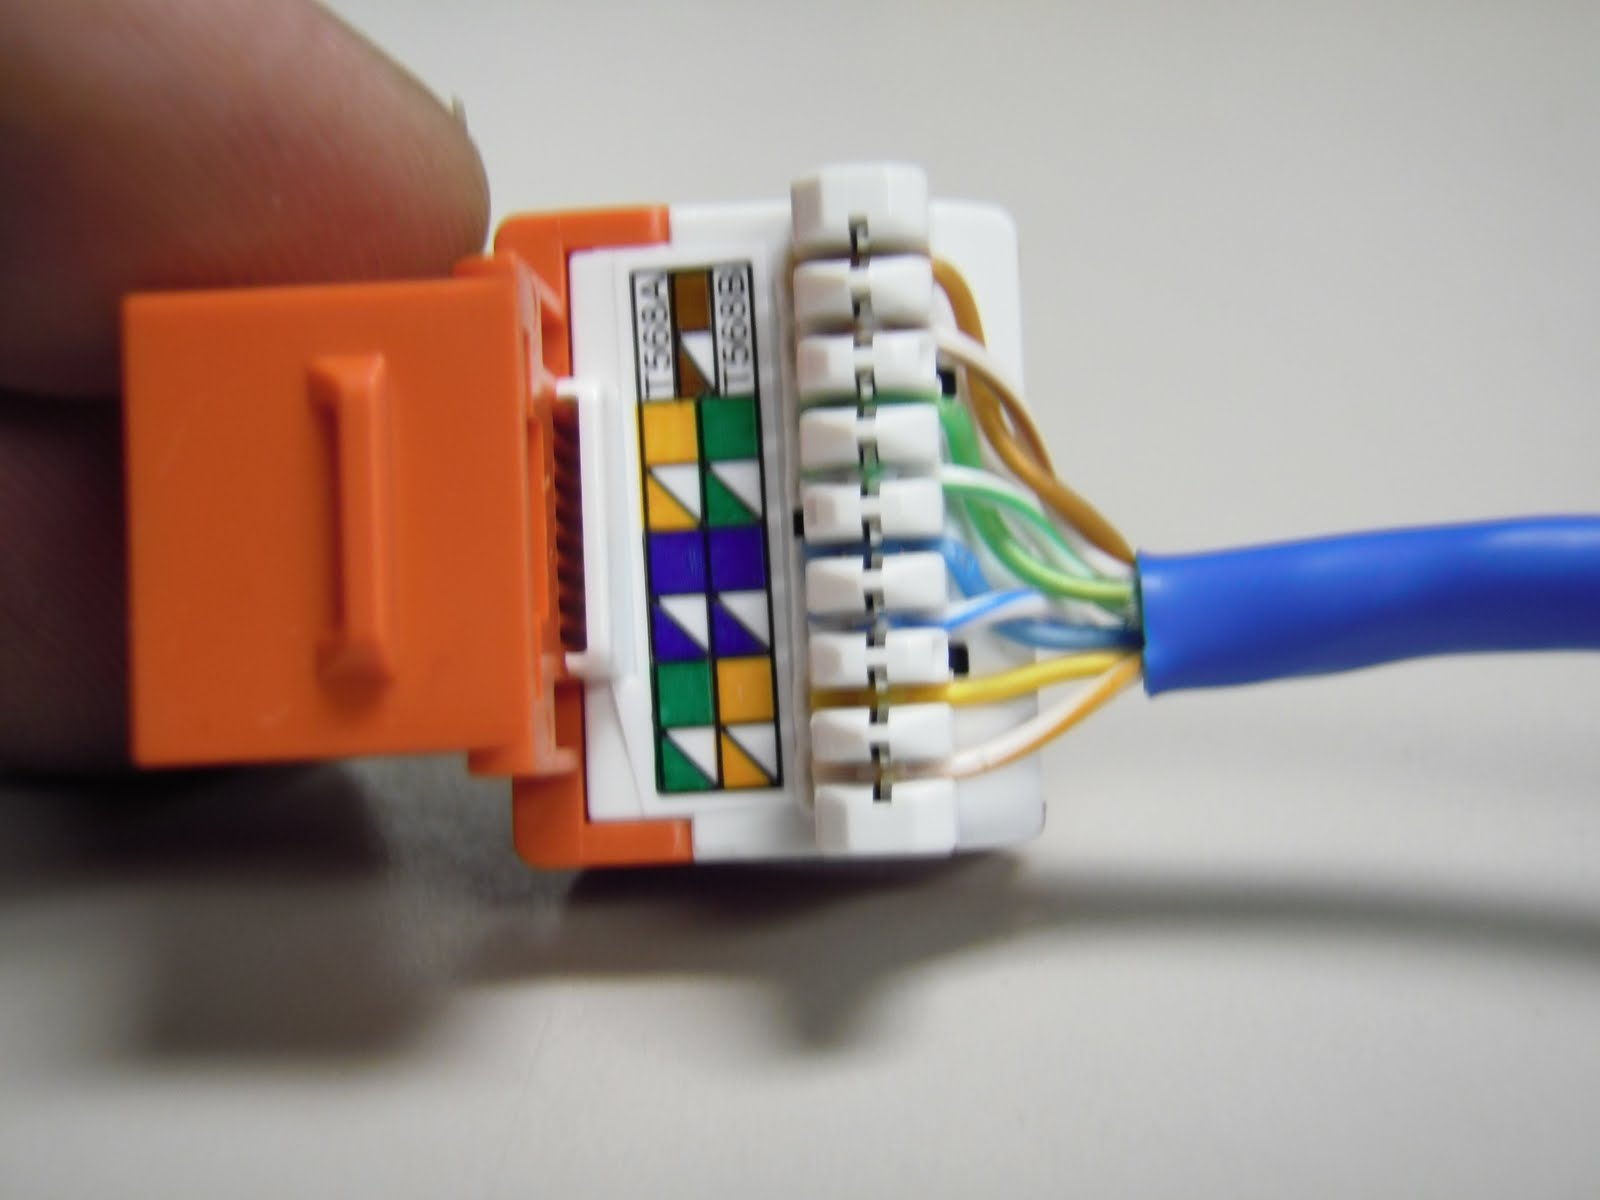 The Trench: How To Punch Down Cat5E/cat6 Keystone Jacks - Rj45 Wall Socket Wiring Diagram